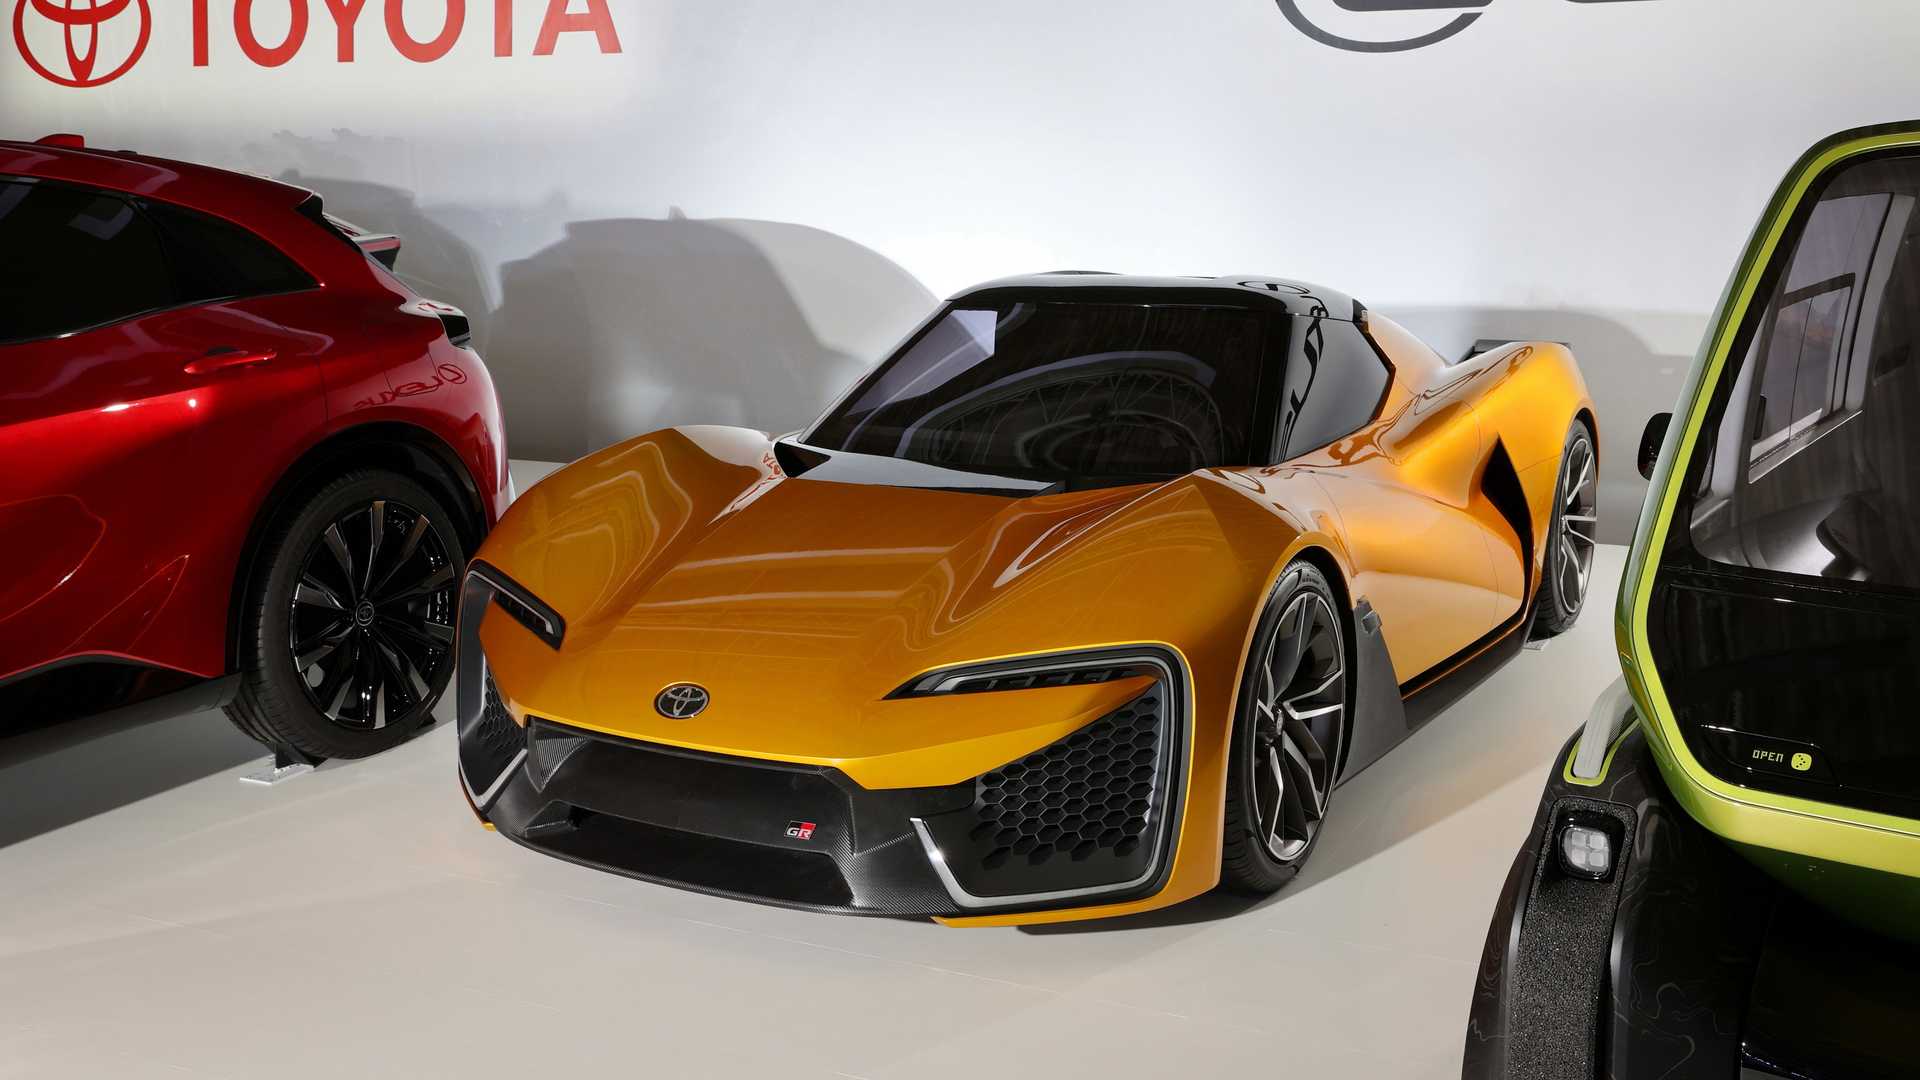 Suzuki and Toyota Sports Car Coming With 1.0-litre Turbo Petrol Motor (1)